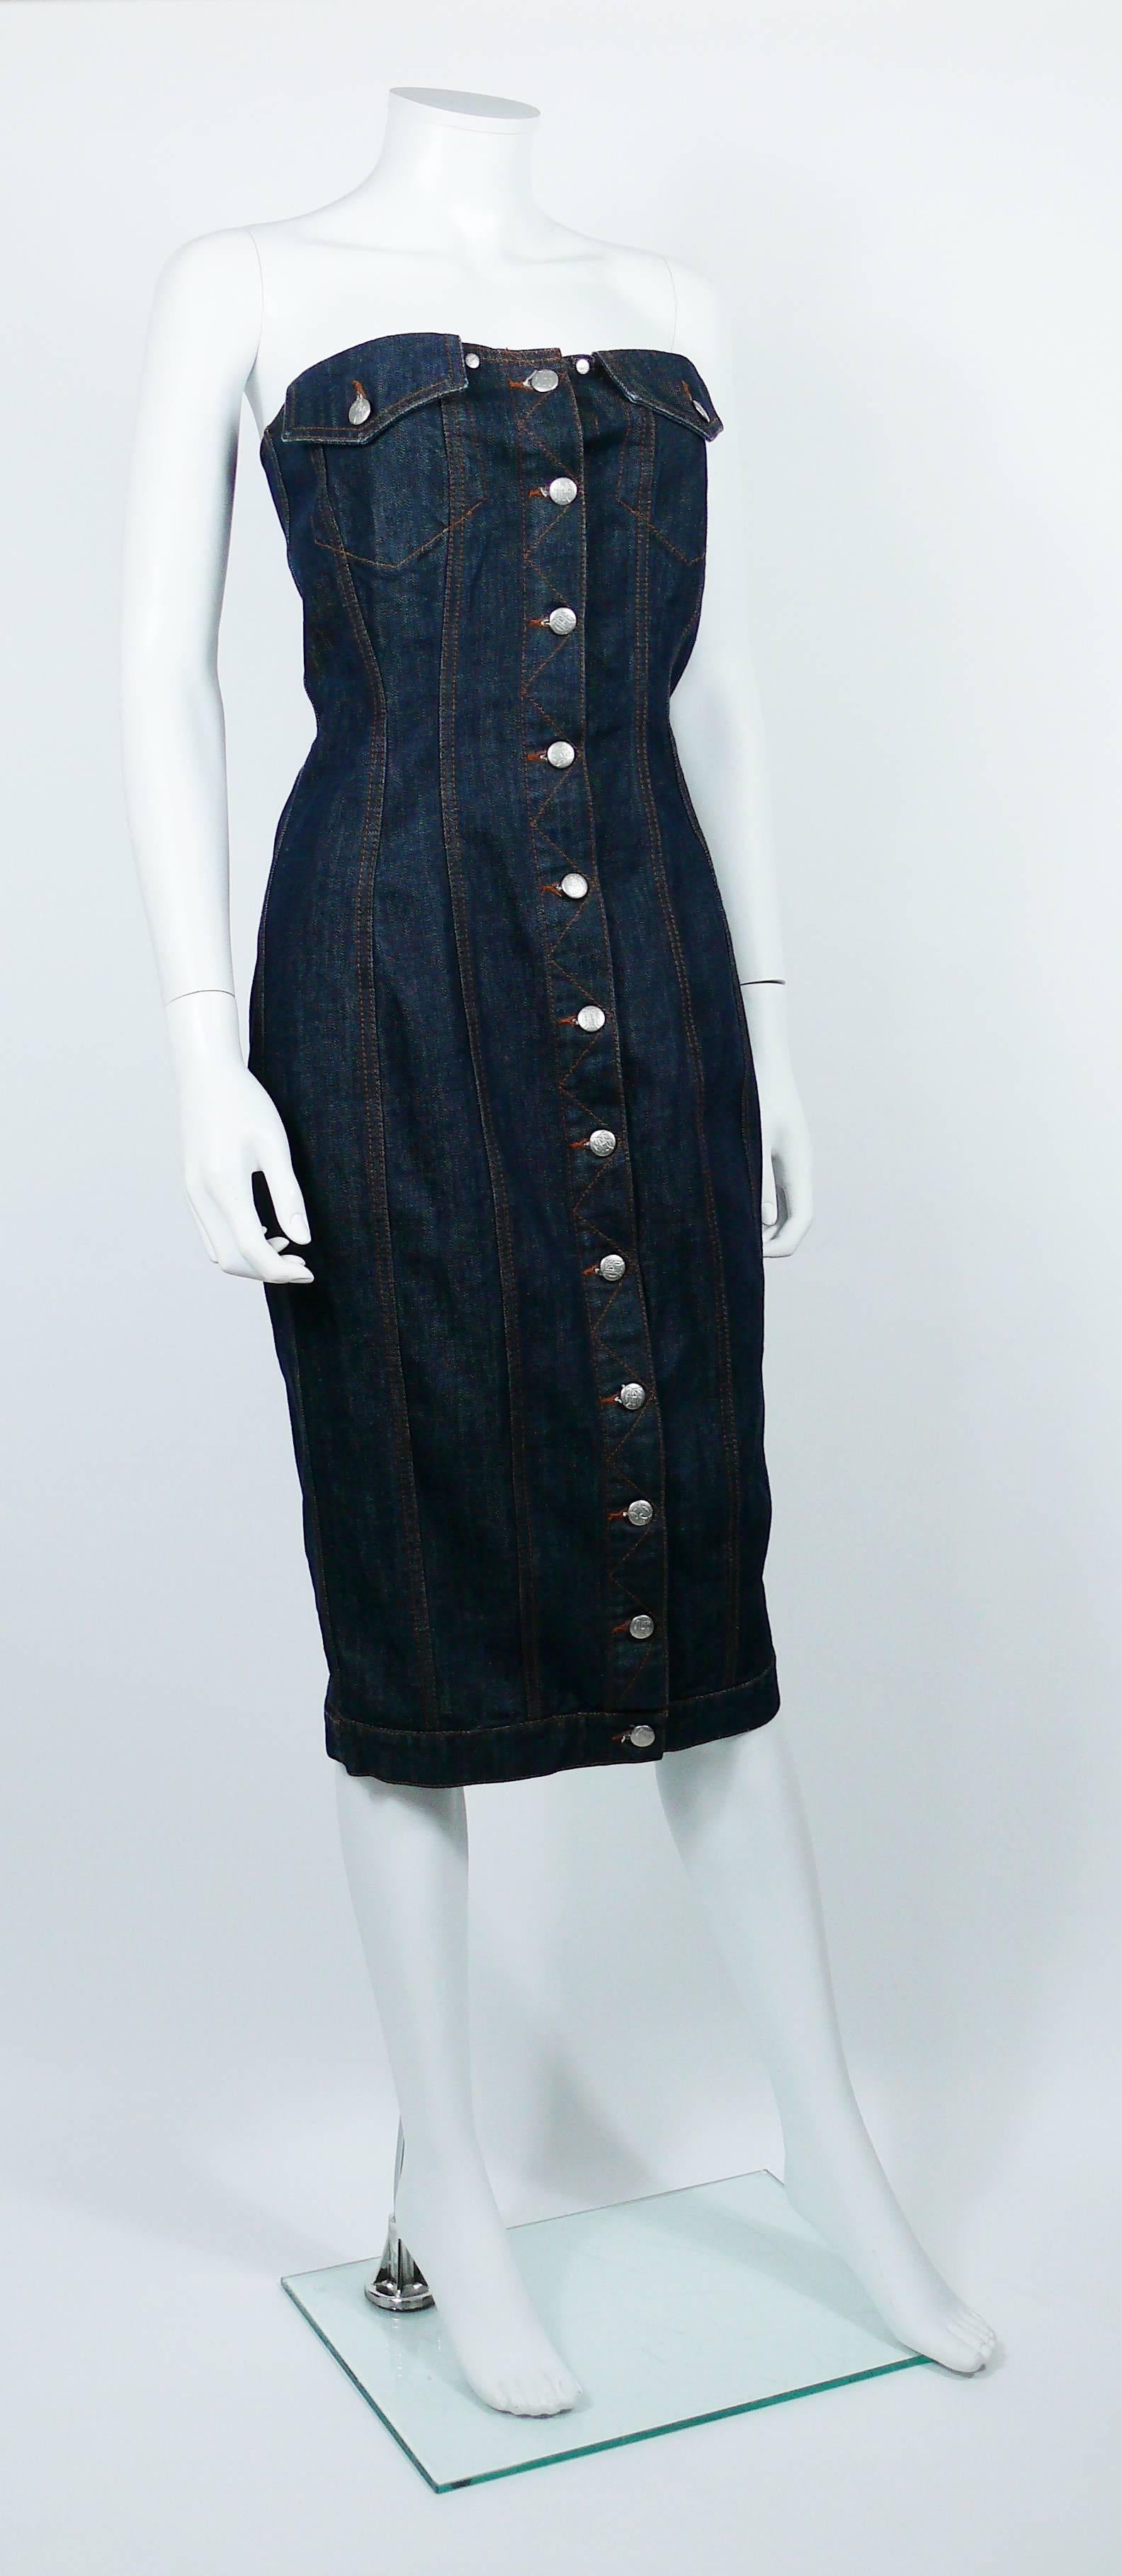 JEAN PAUL GAULTIER vintage denim bustier dress.

This dress features :
- Front buttoning. 
- Lace-up back.
- Boning on breast area.
- Two front pockets.
- Silver tone buttons.
- Contrast stitching.

Label reads JPG JEAN'S by GAULTIER.
Producted and